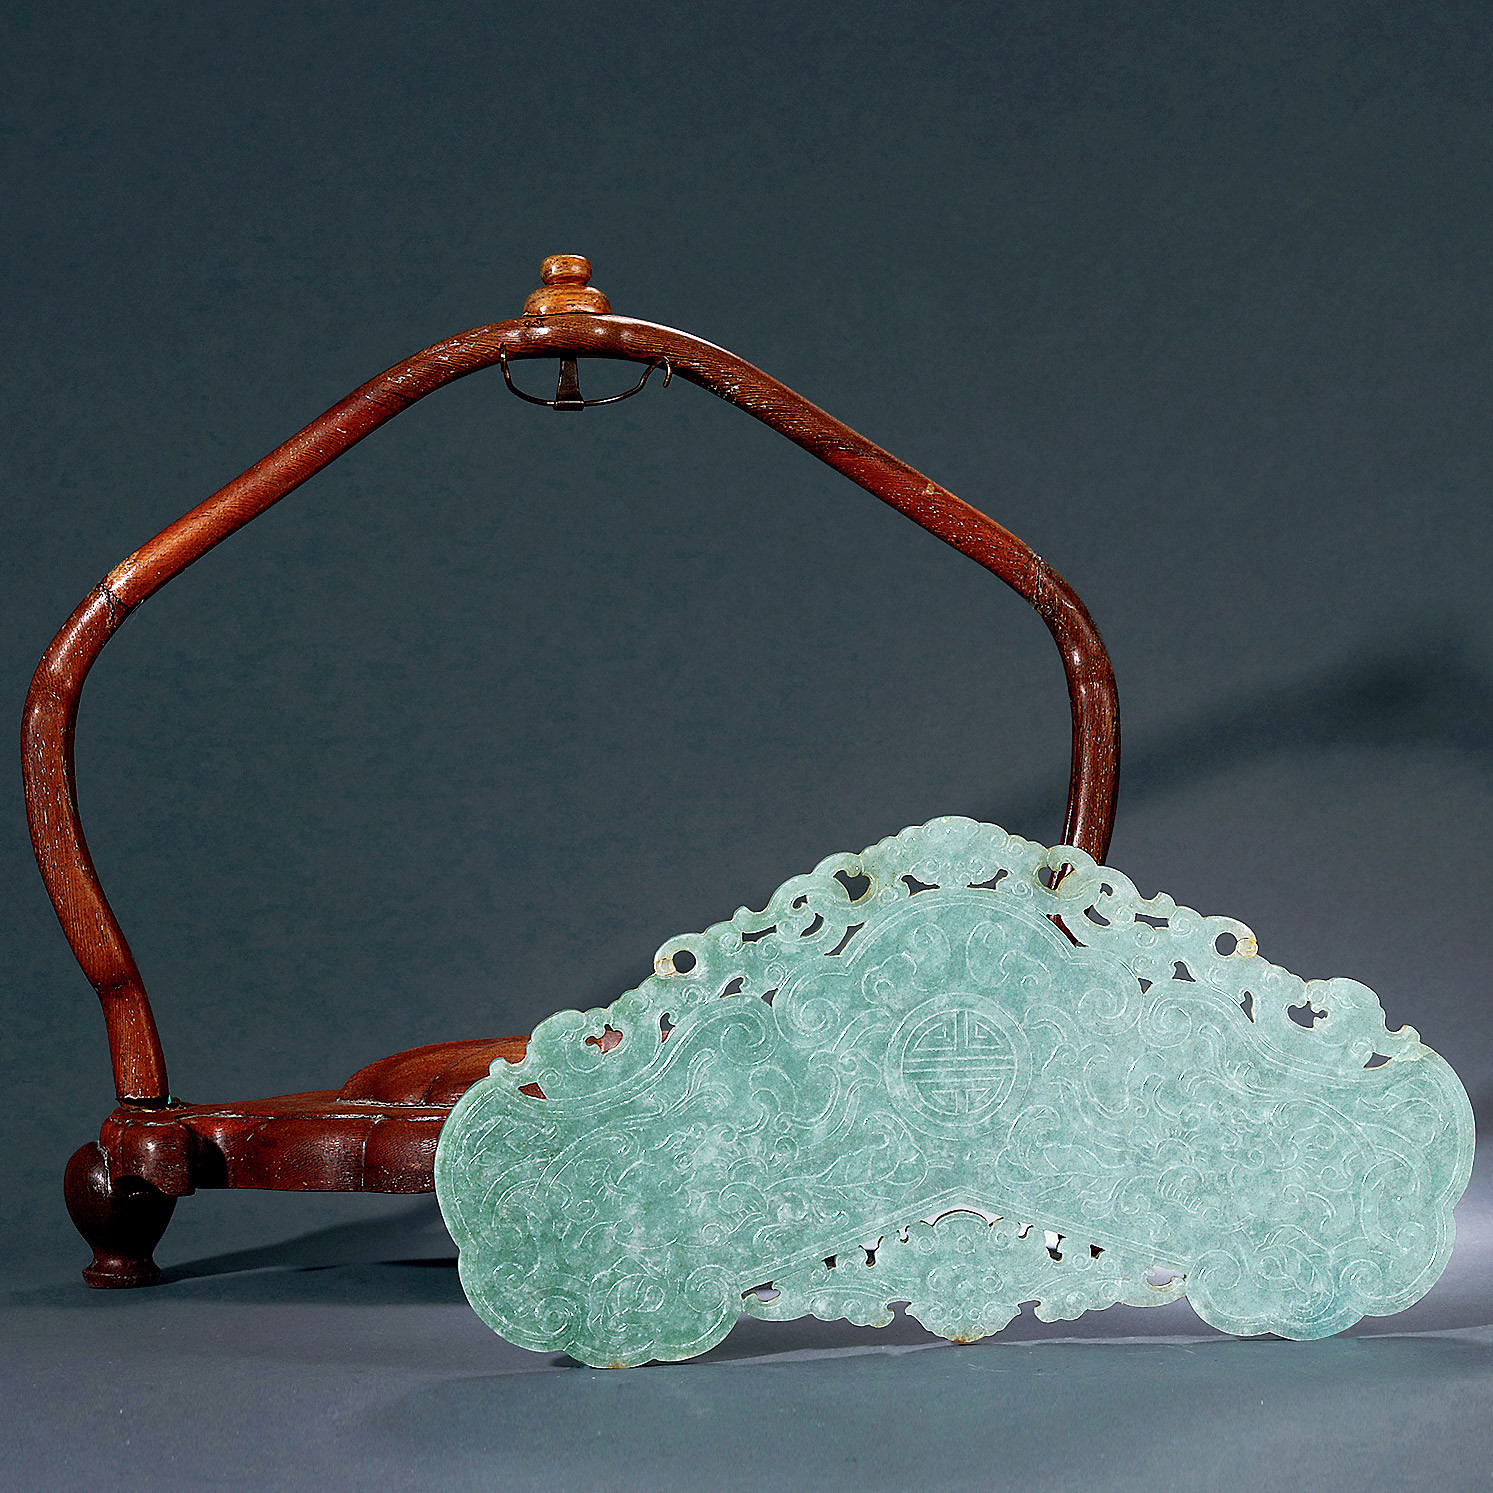 A CARVED JADEITE‘FORTUNE AND LONGEVITY’CHIME WITH‘DOUBLE-DRAGON’DESIGN